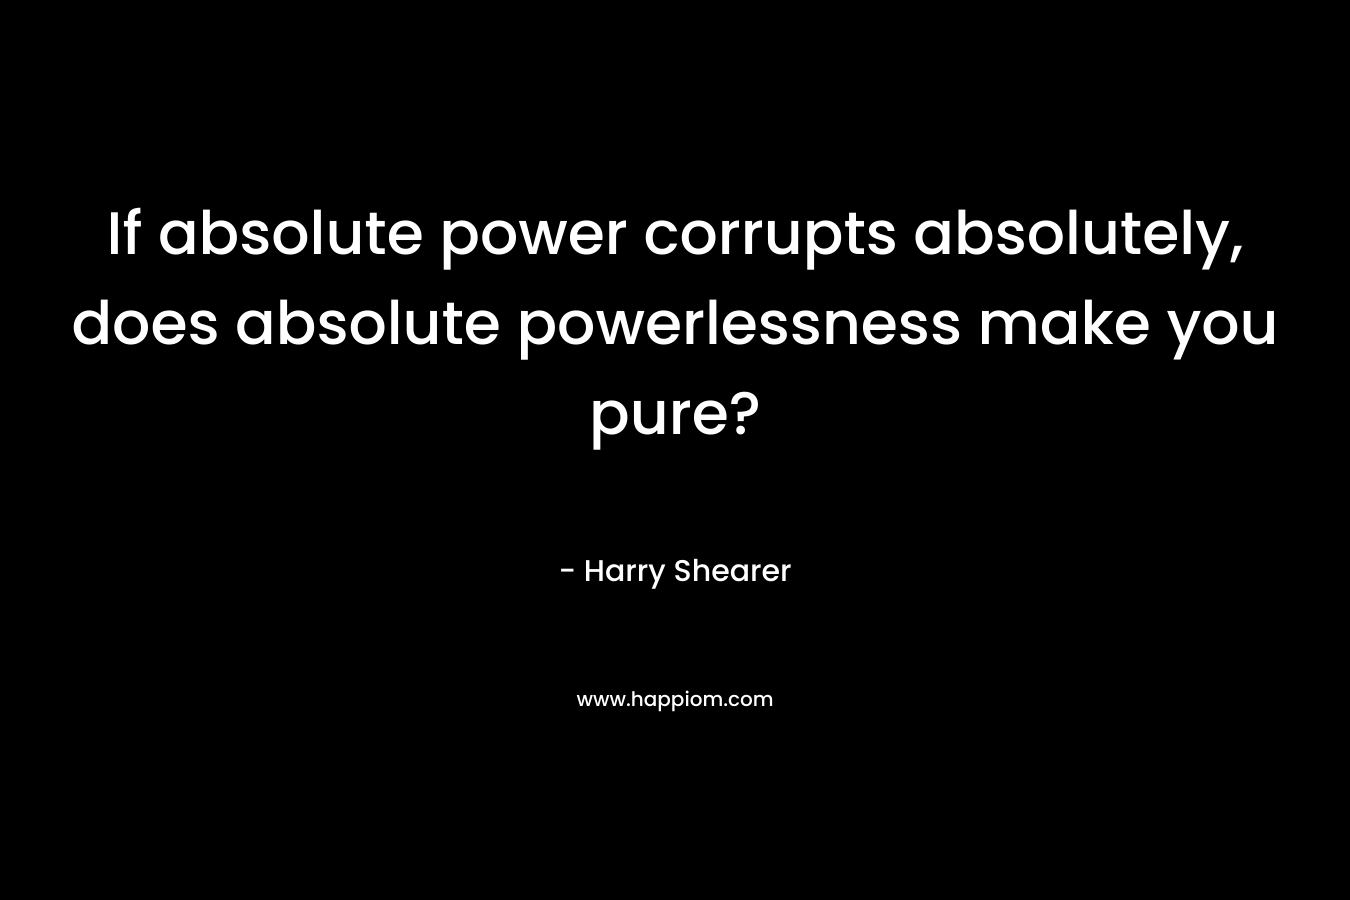 If absolute power corrupts absolutely, does absolute powerlessness make you pure?